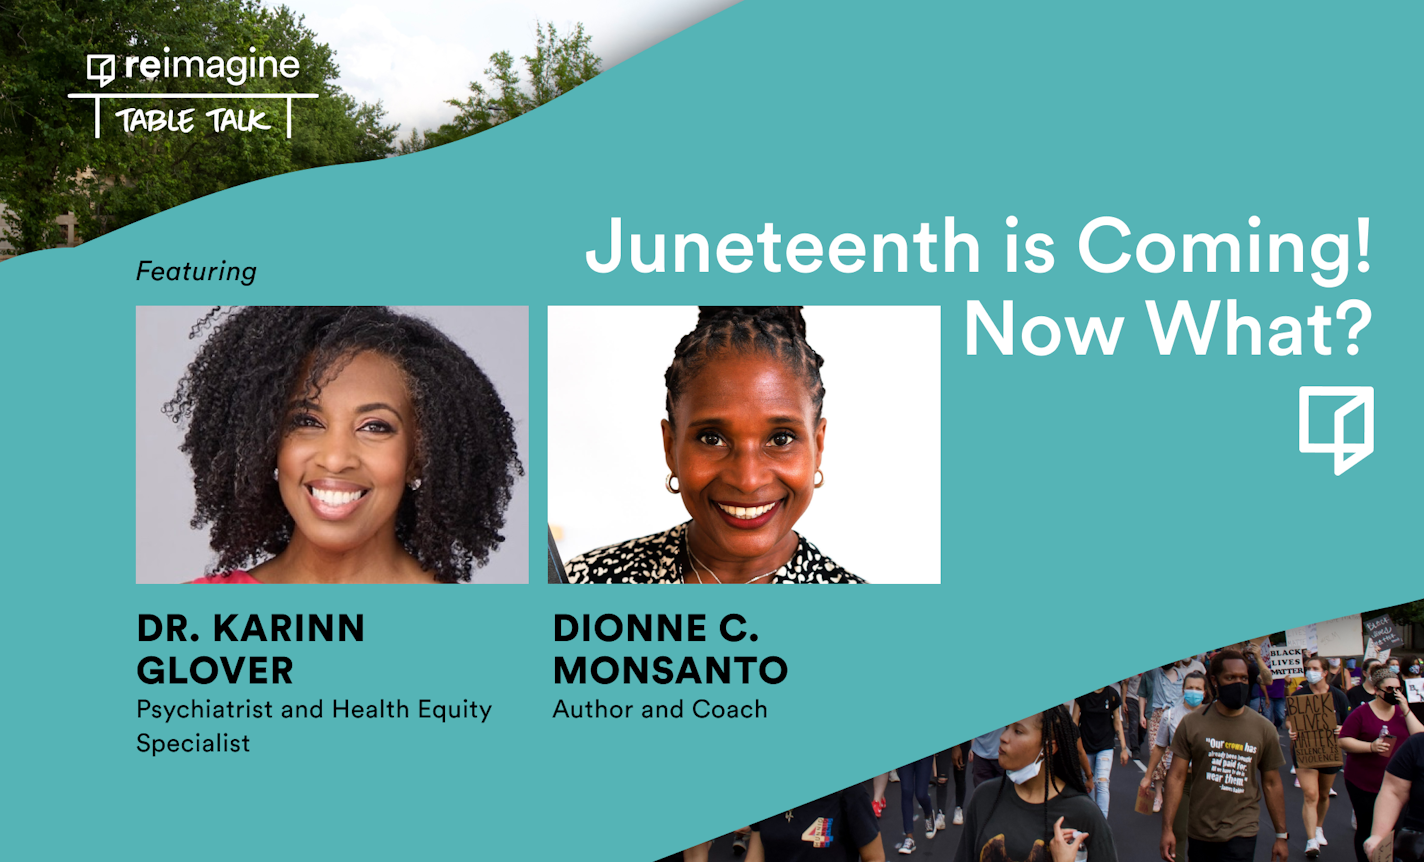 Juneteenth is Coming! Now What?